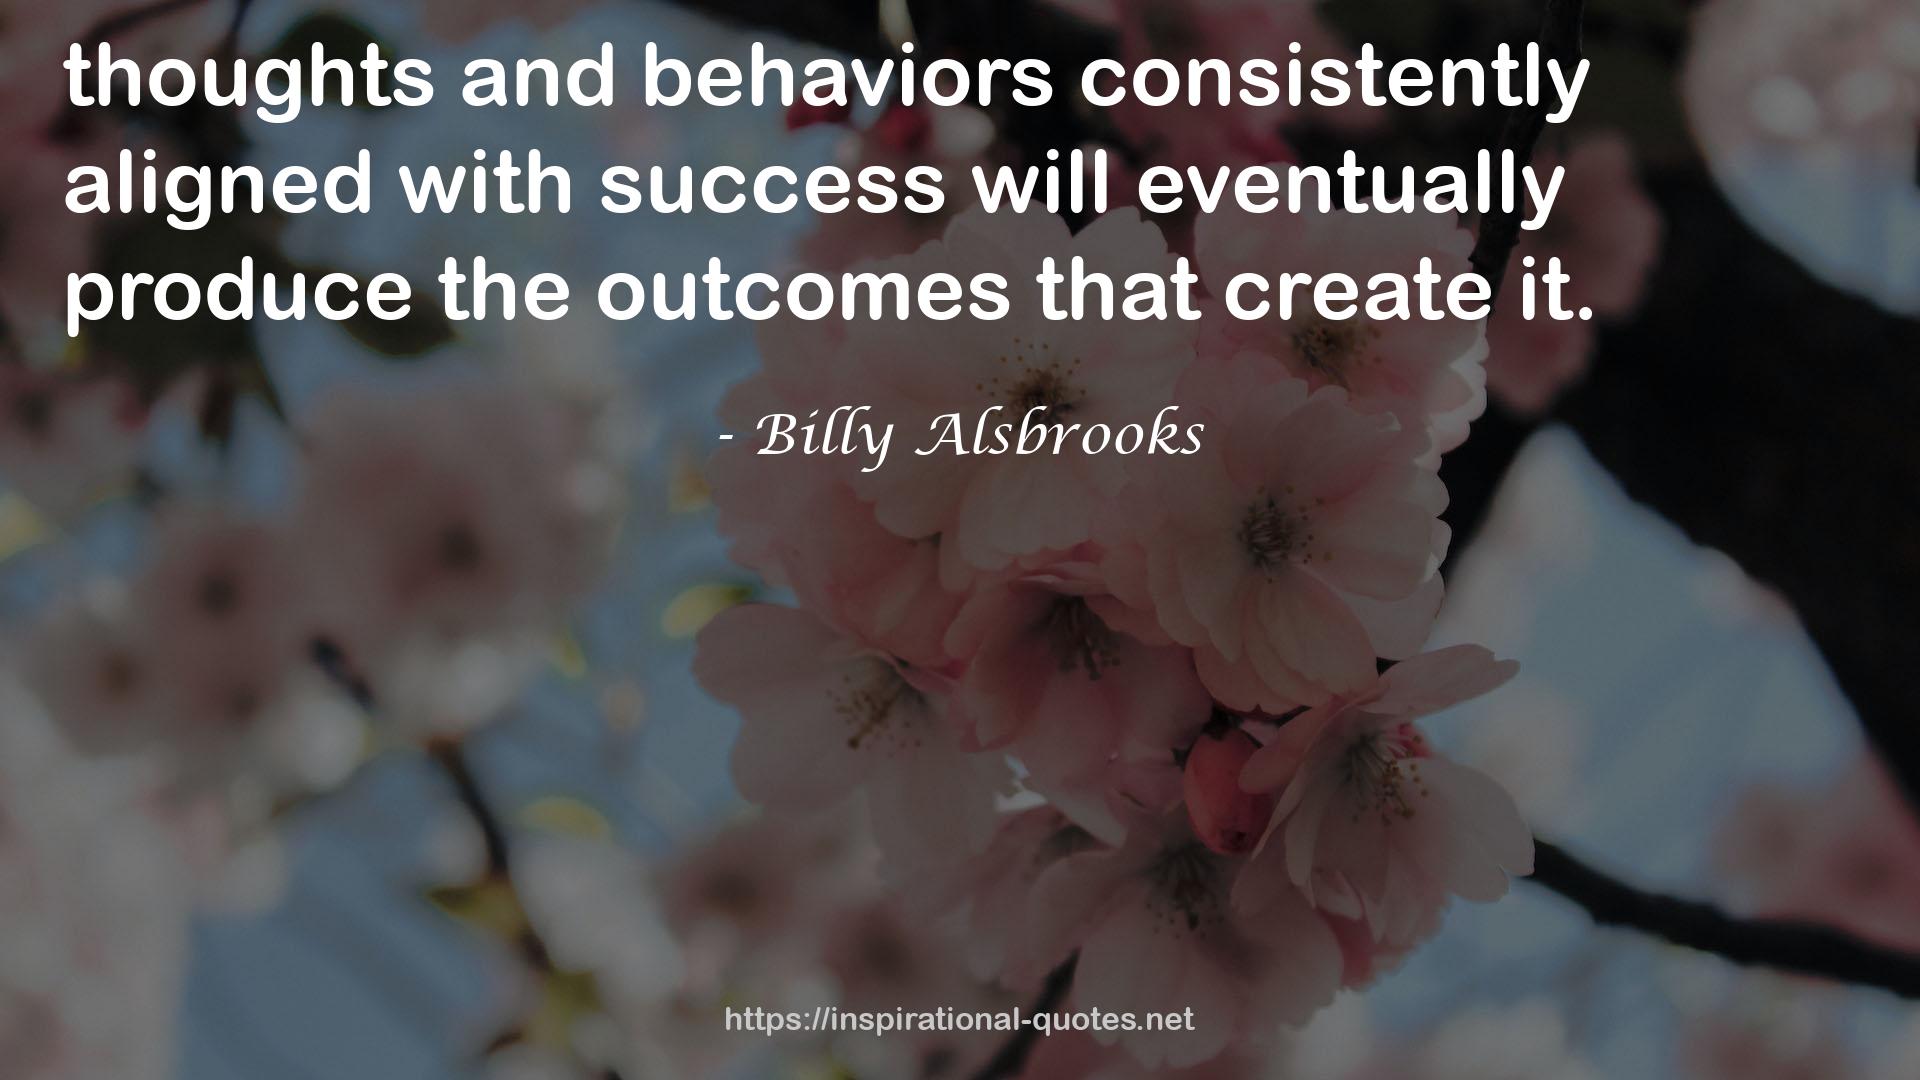 Billy Alsbrooks QUOTES